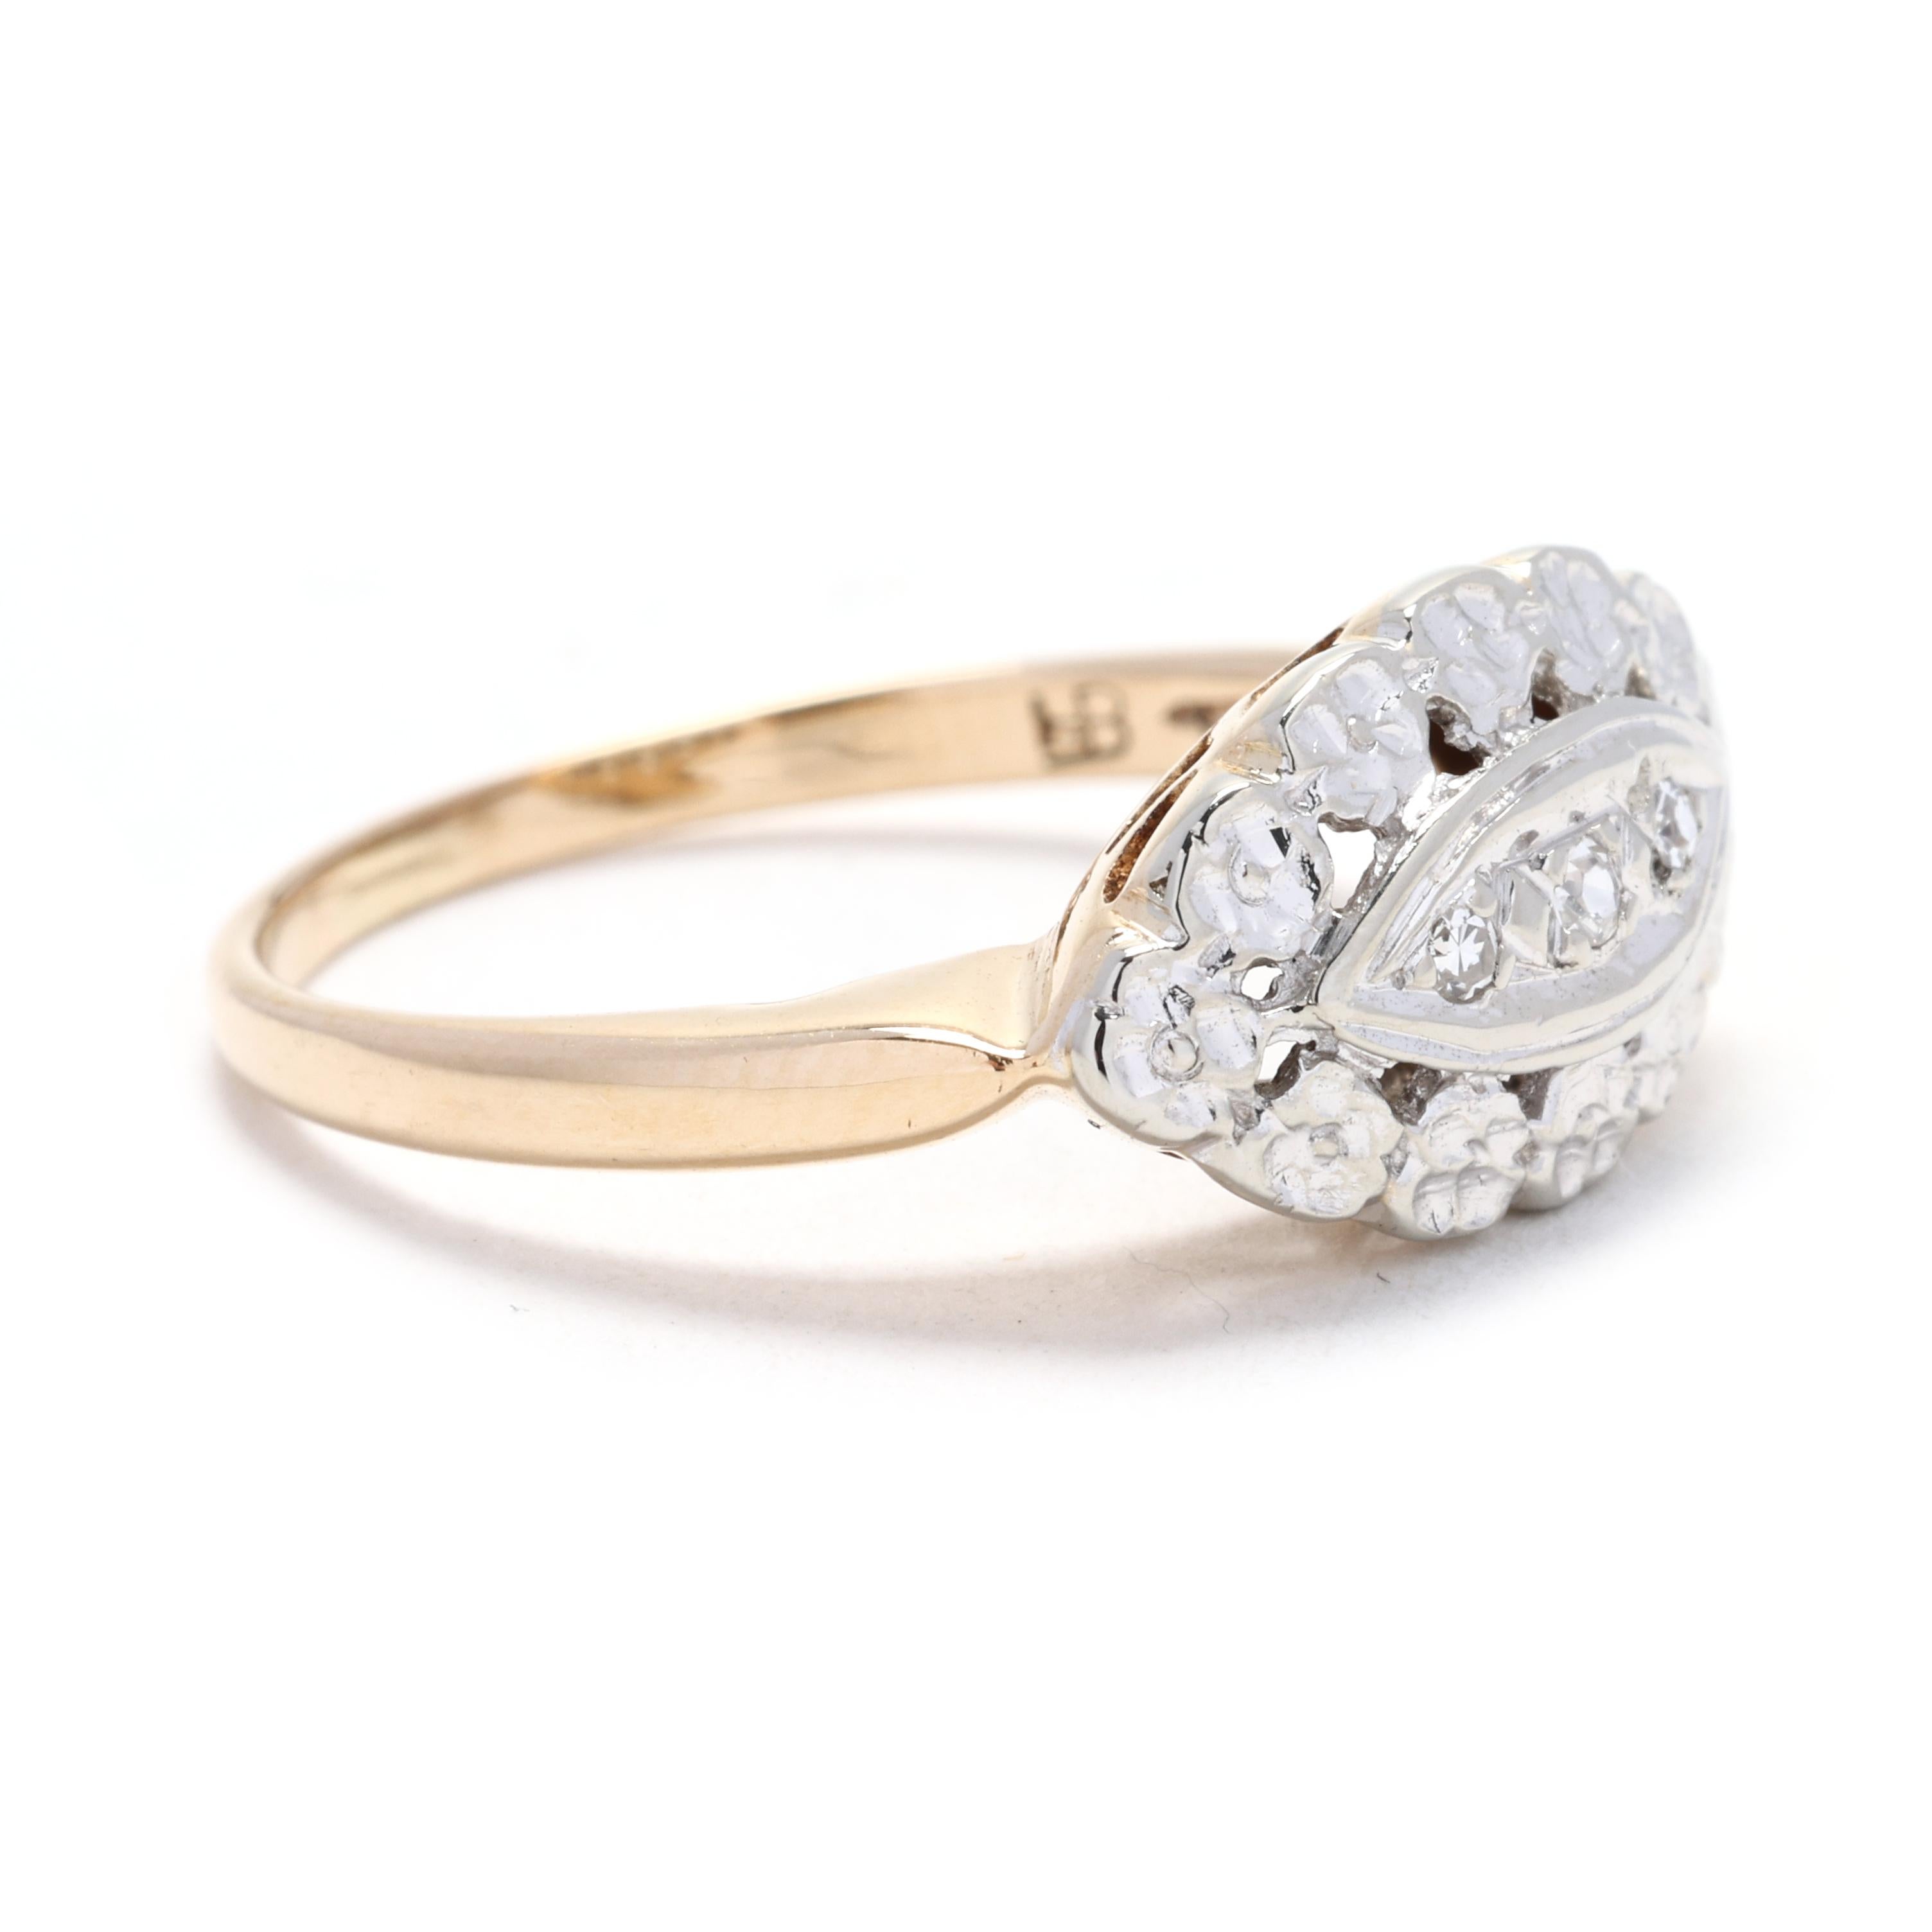 This gorgeous 14k yellow and white gold ring is a true statement piece. The ring features a unique and intricate design, with yellow gold accents highlighting the white gold band. The yellow gold is polished to a high shine, while the white gold